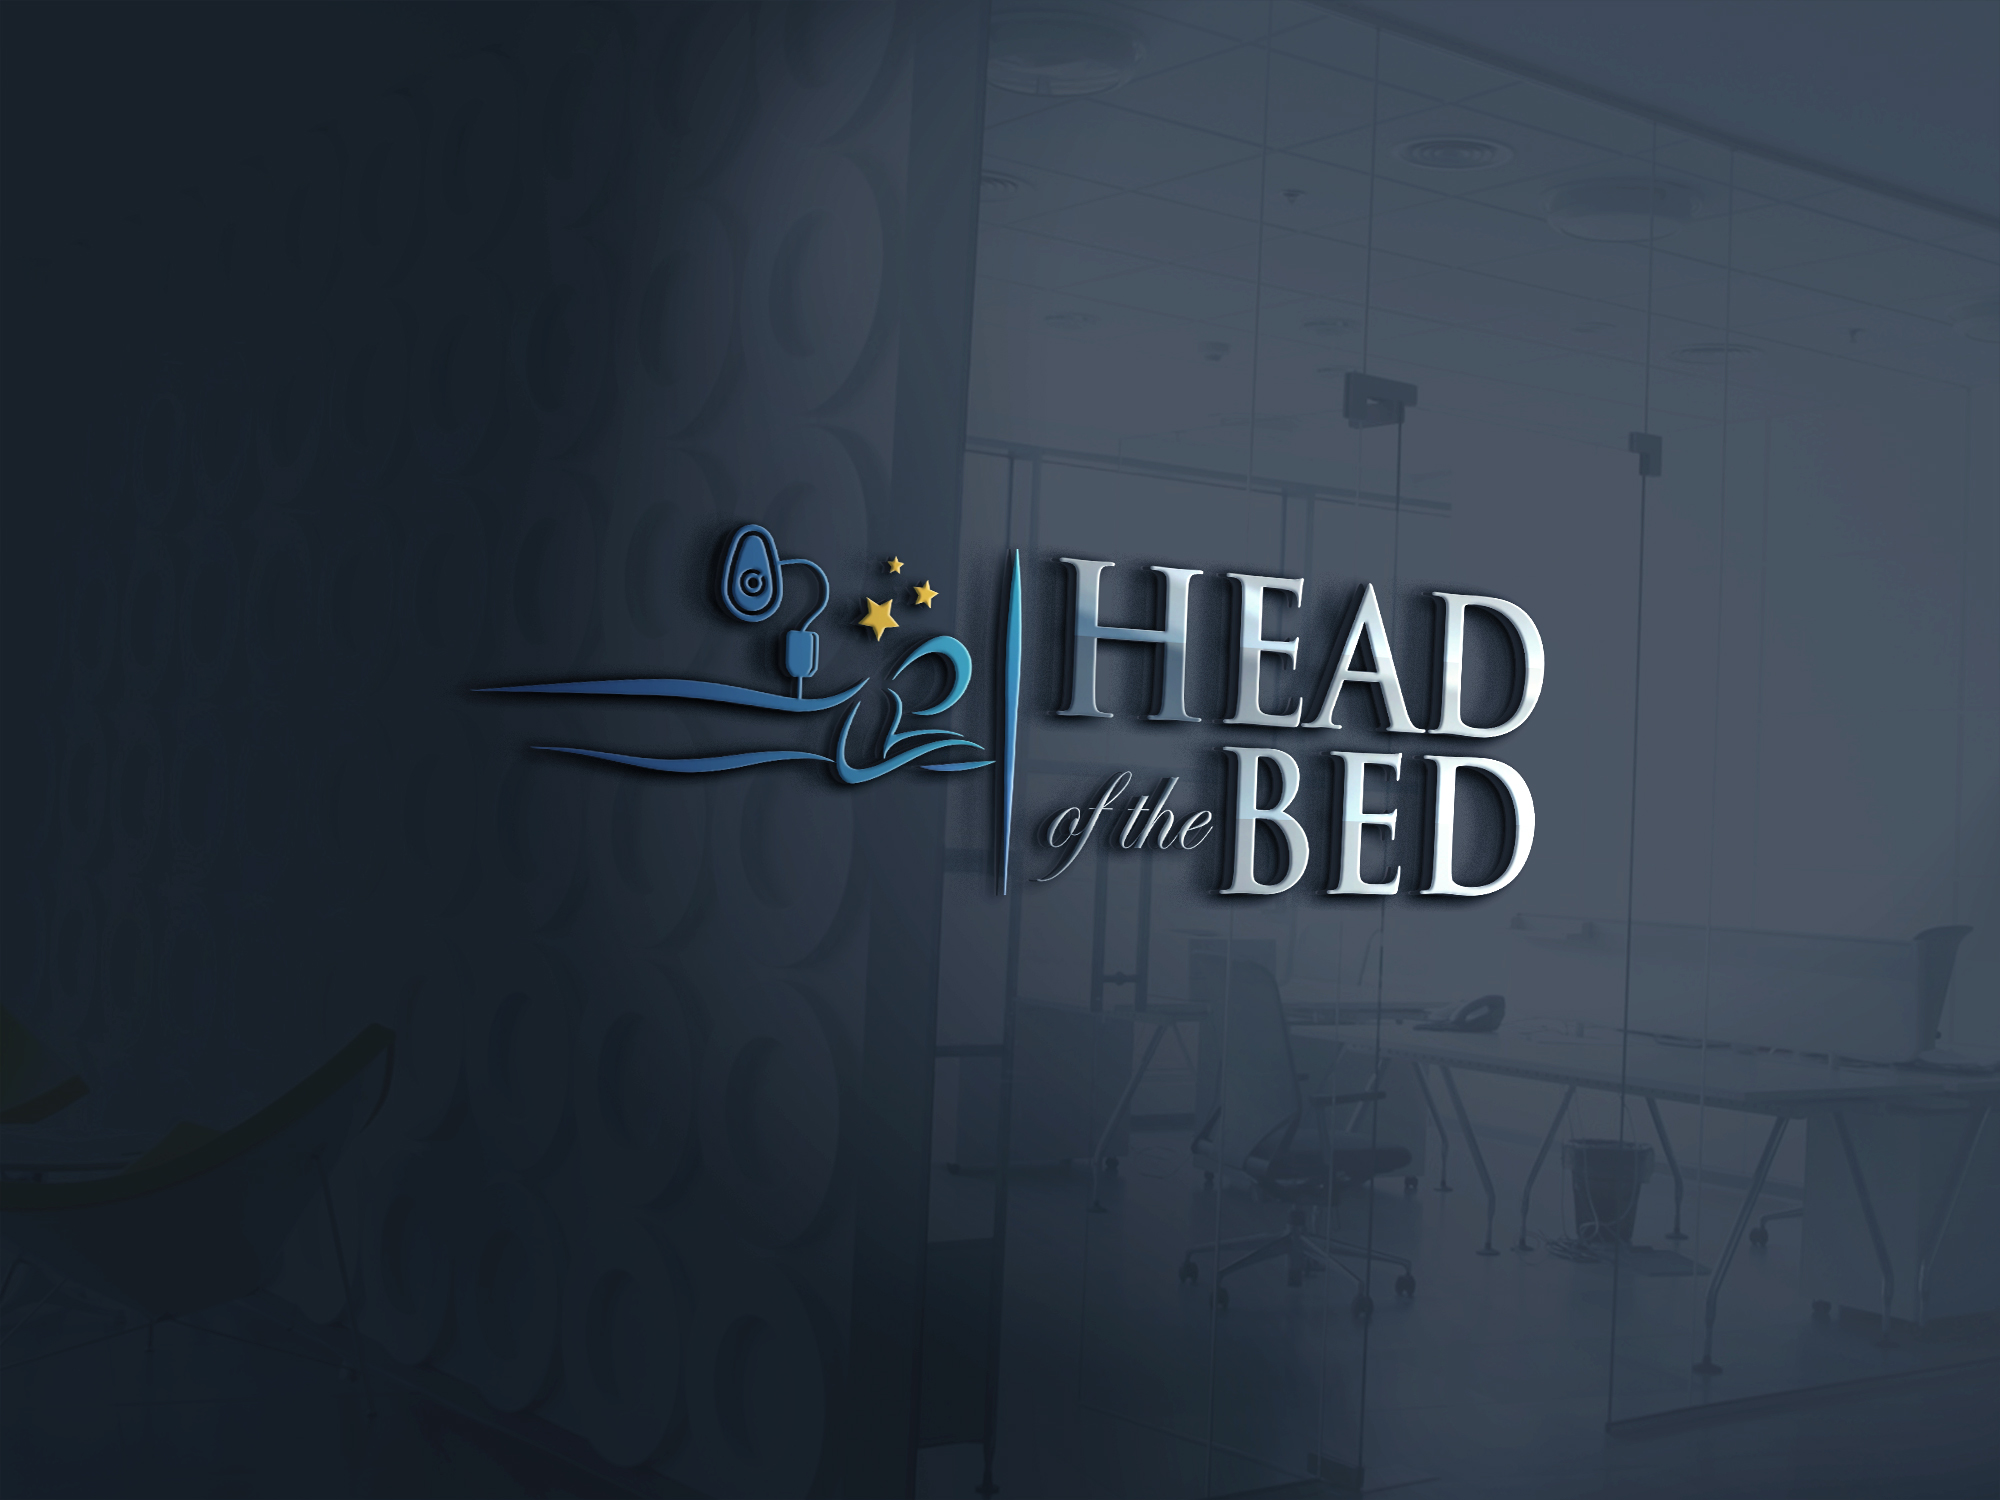 About HeadoftheBed